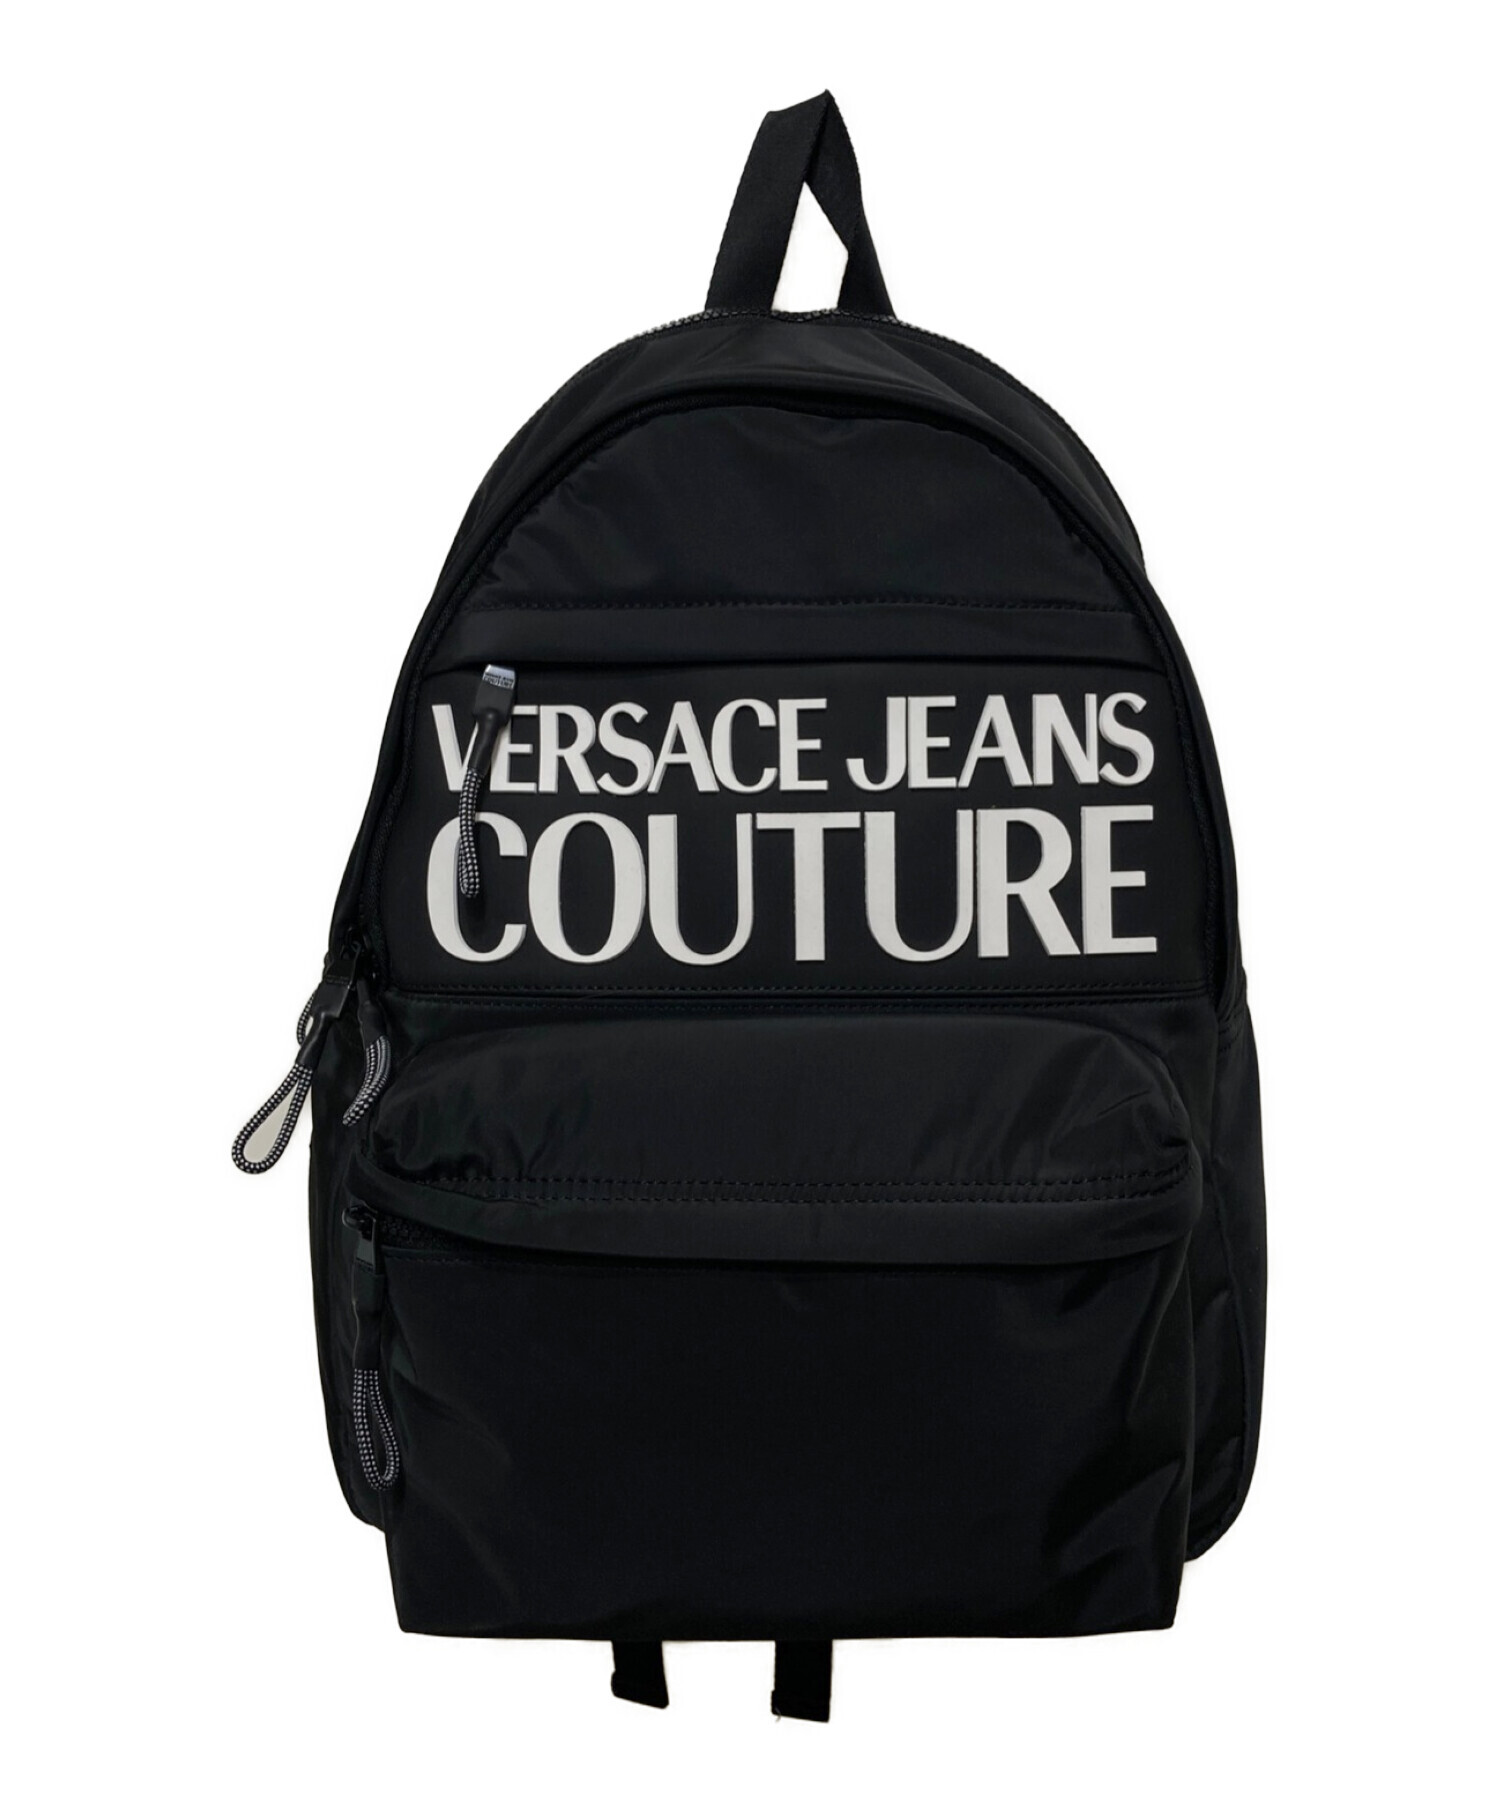 VERSACE JEANS COUTURE リュック バックパック ネイビー